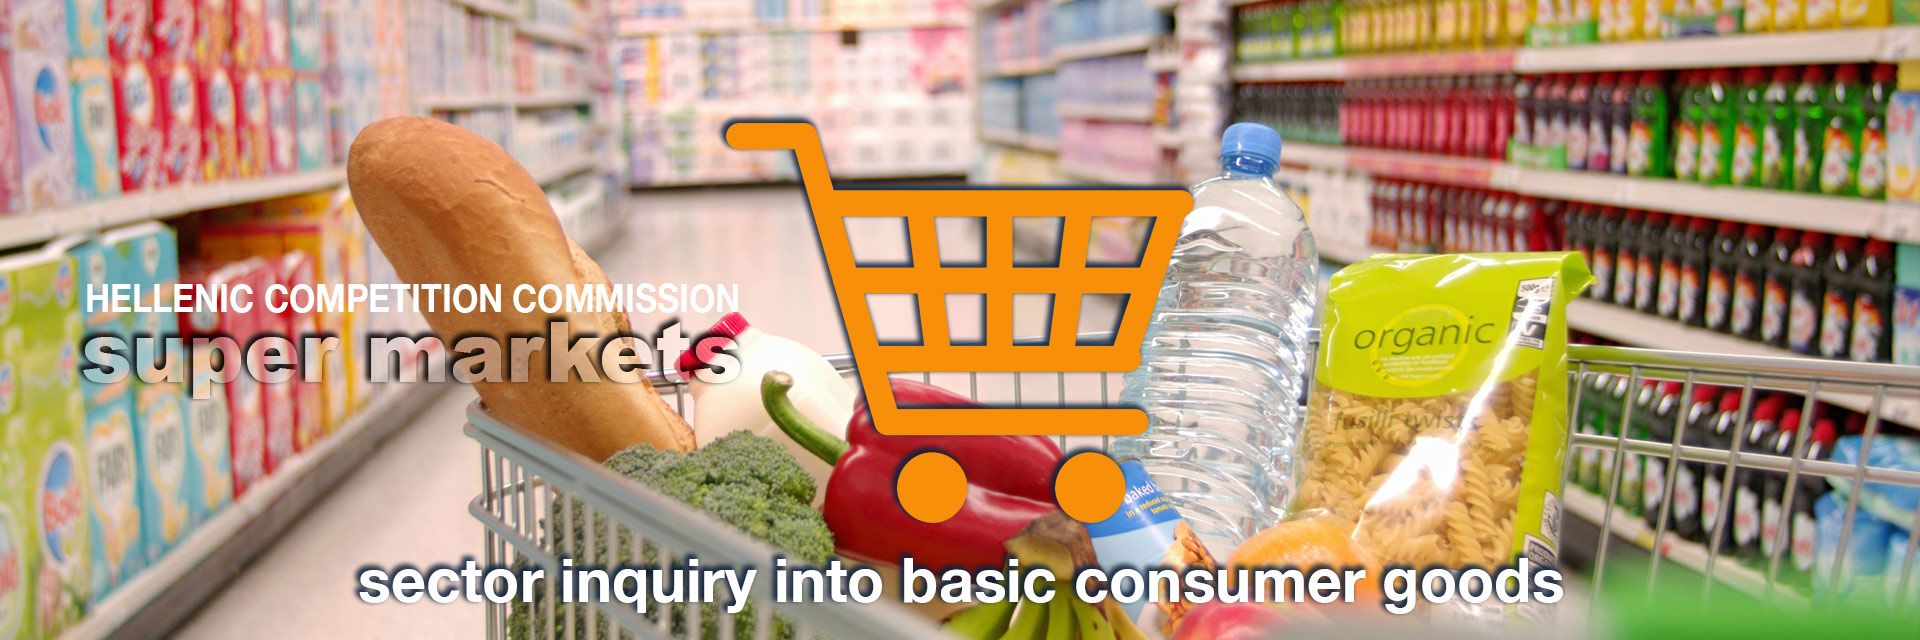 Sector inquiry into basic consumer goods